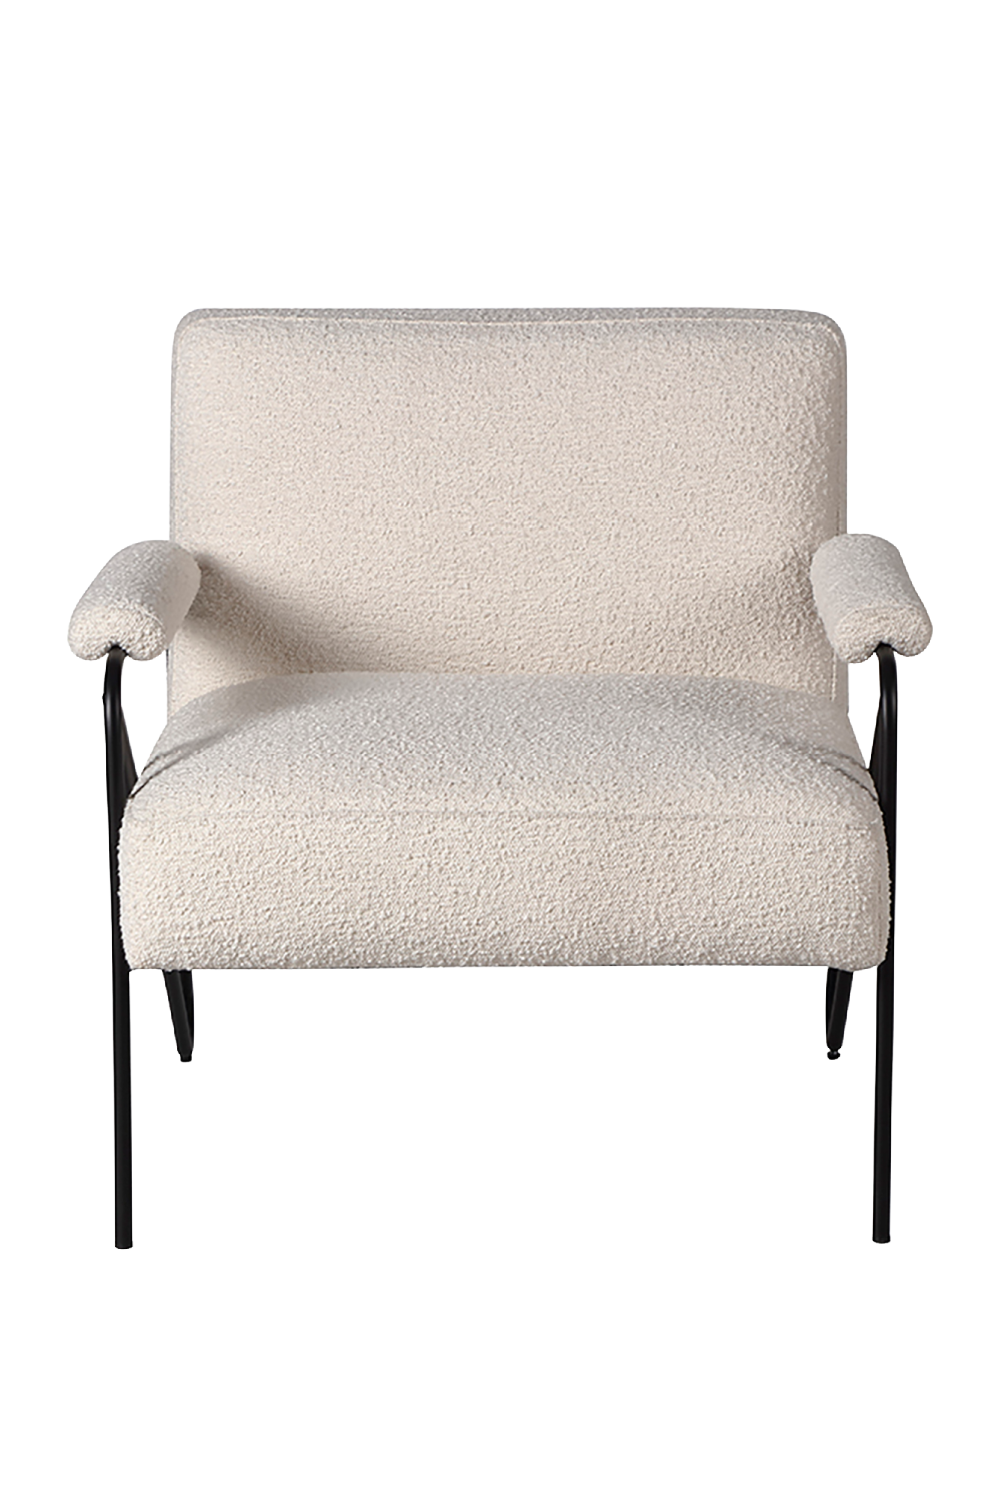 Scandi Style Occasional Chair | Liang & Eimil Kemper | Oroa.com